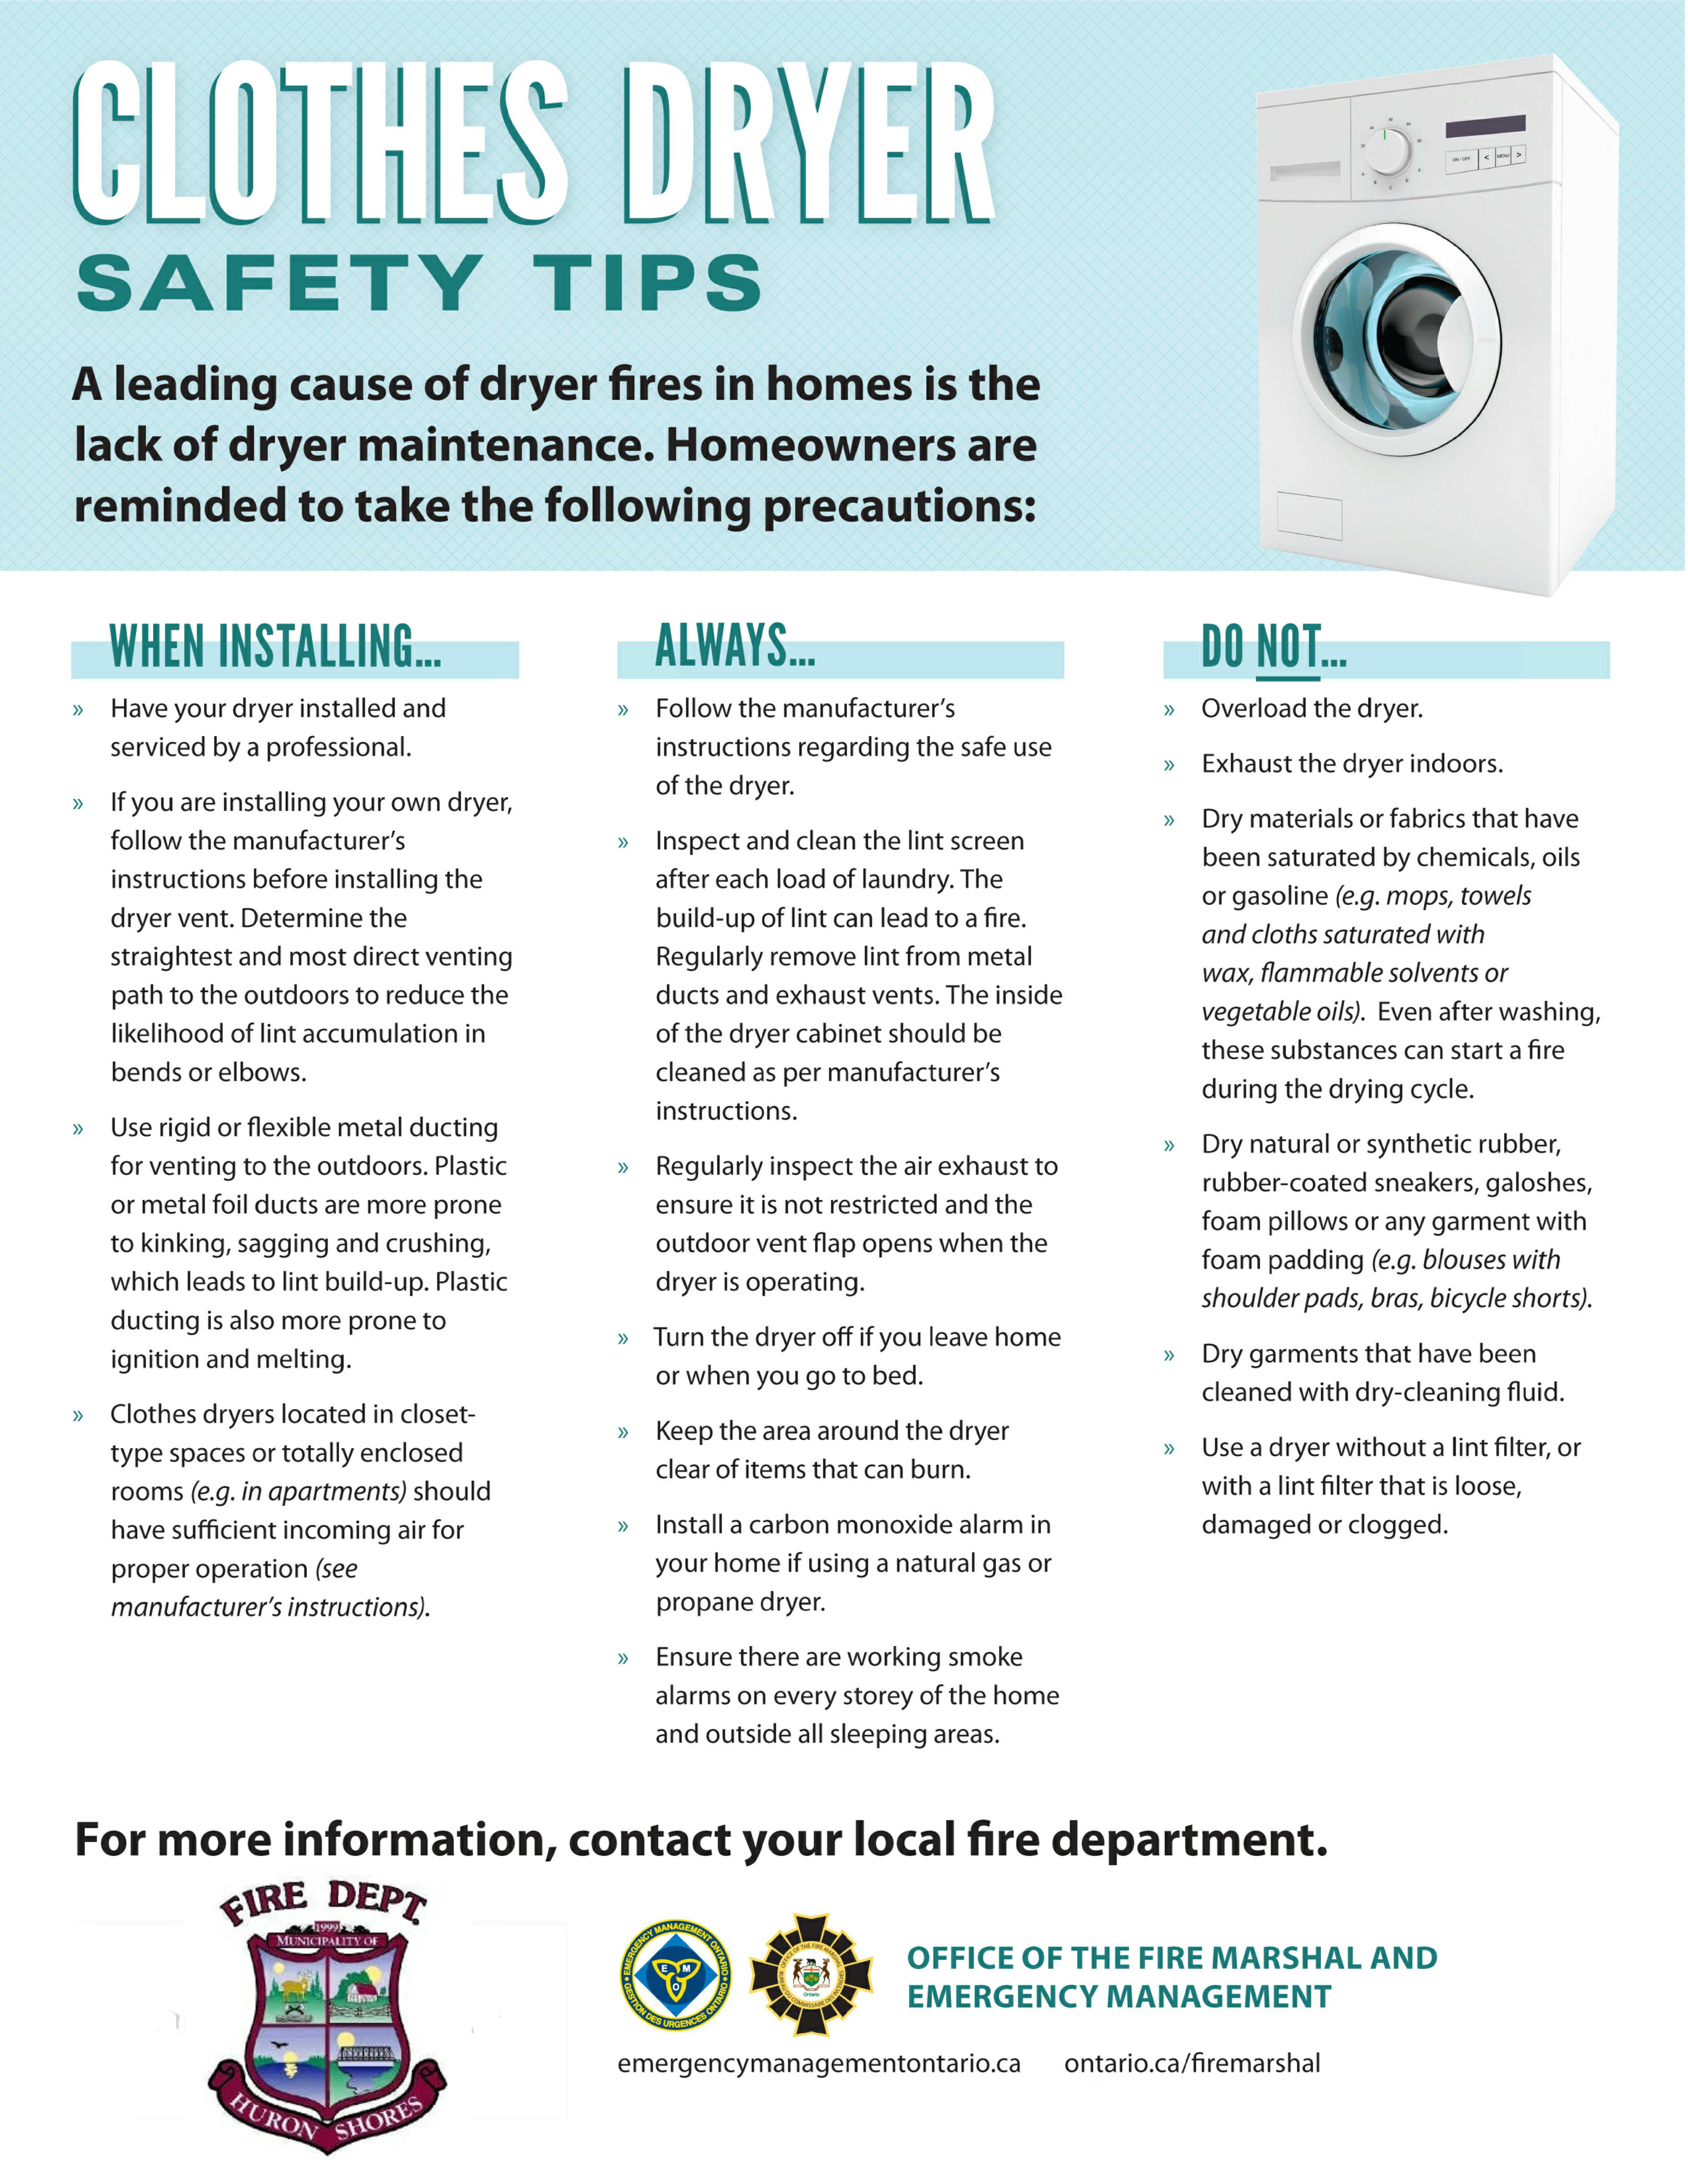 https://huronshores.ca/wp-content/uploads/2015/07/Clothes-Dryer-Fire-Safety-Tips-with-HSFD-Crest.jpg